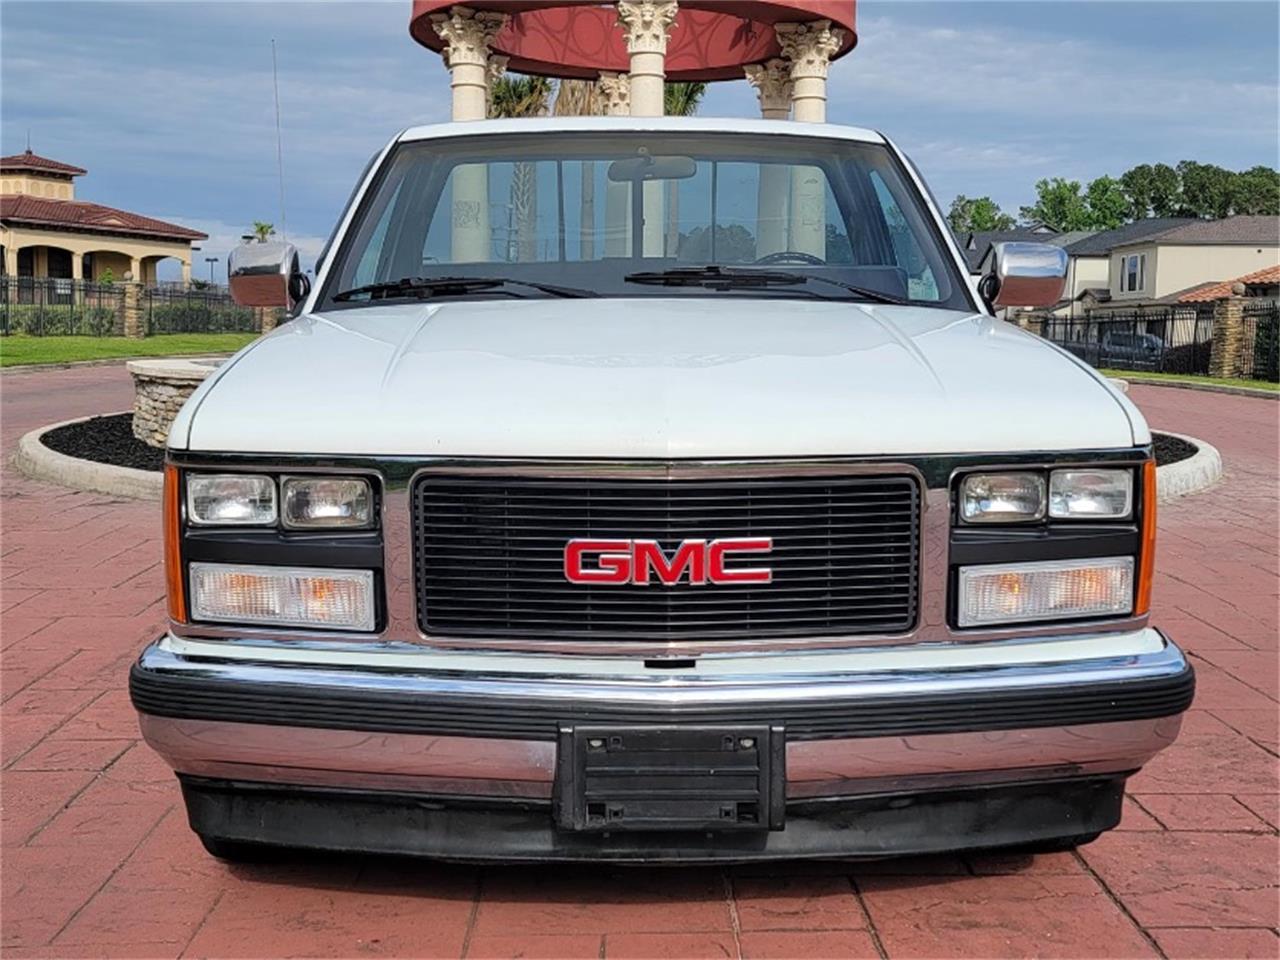 For Sale: 1989 GMC 1500 in Hobart, Indiana for sale in Hobart, IN